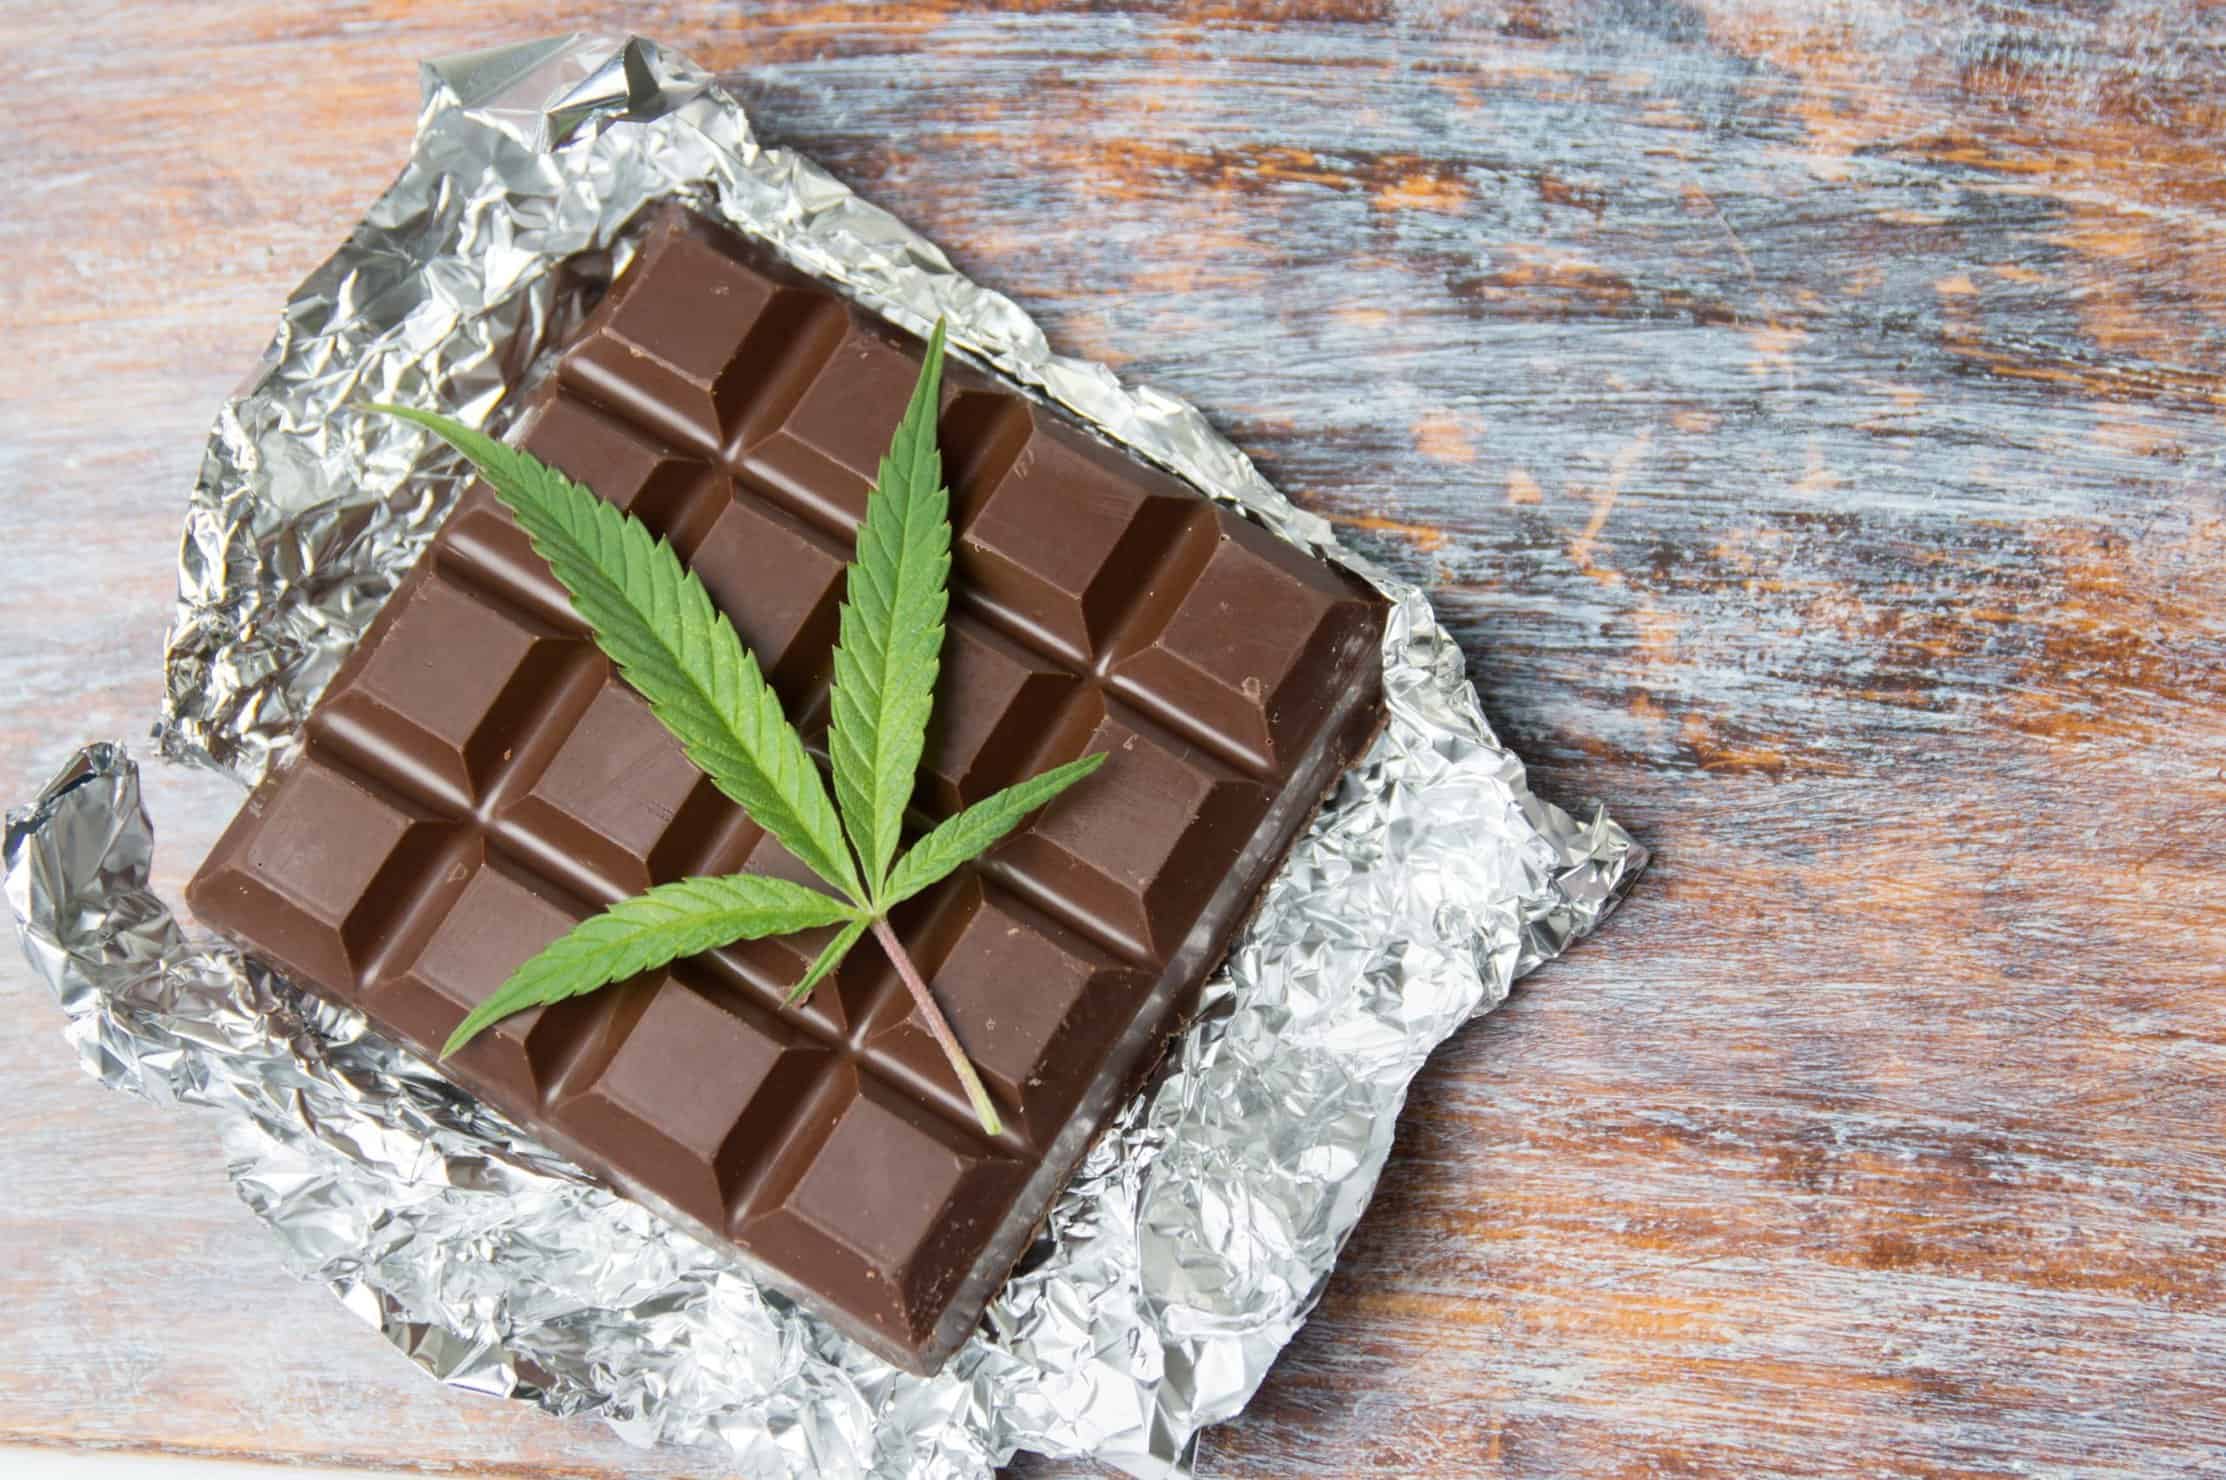 Controlling Potency in Cannabis Edibles